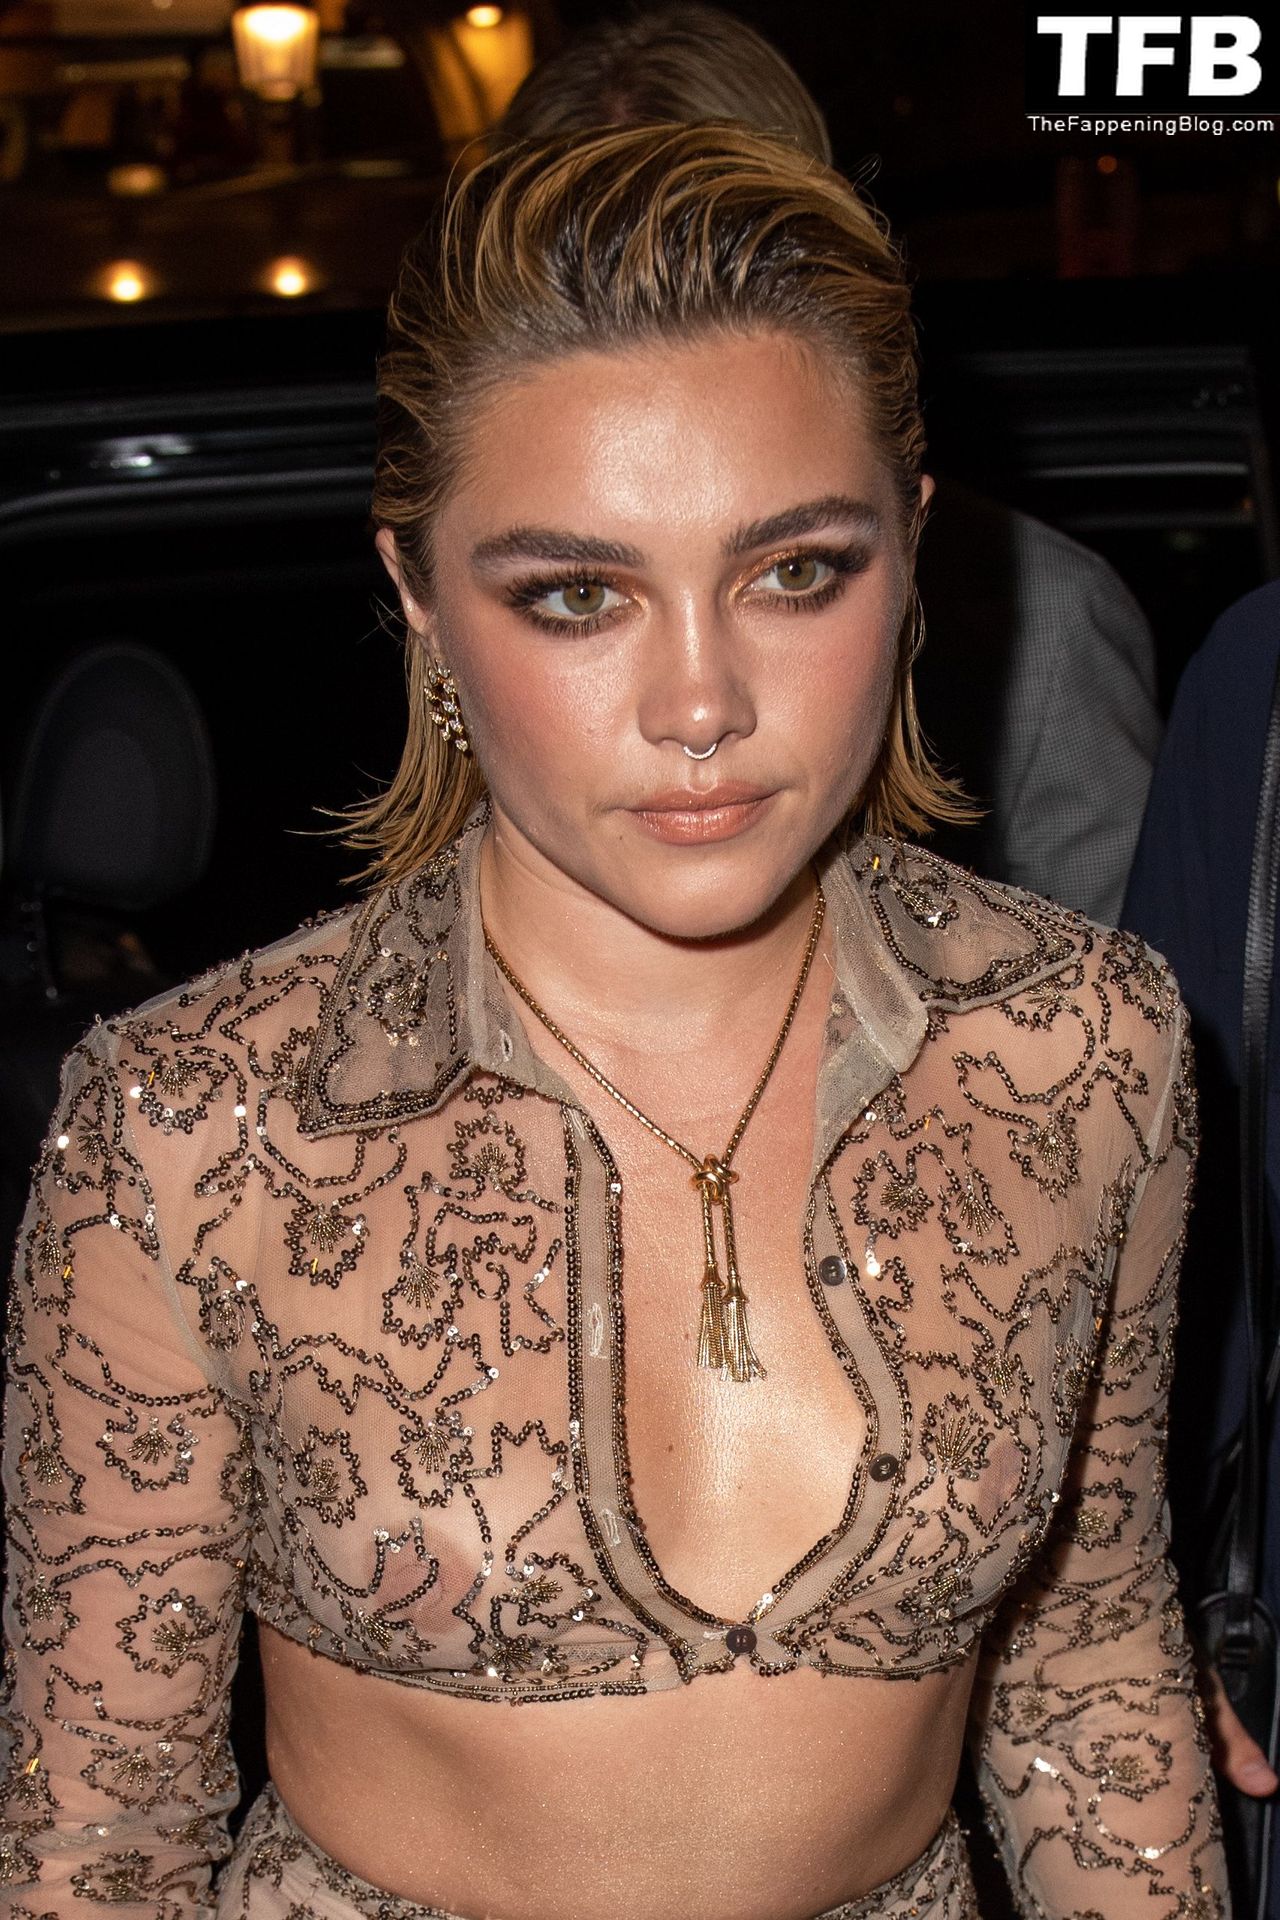 Florence-Pugh-See-Through-Nudity-The-Fappening-Blog-10.jpg